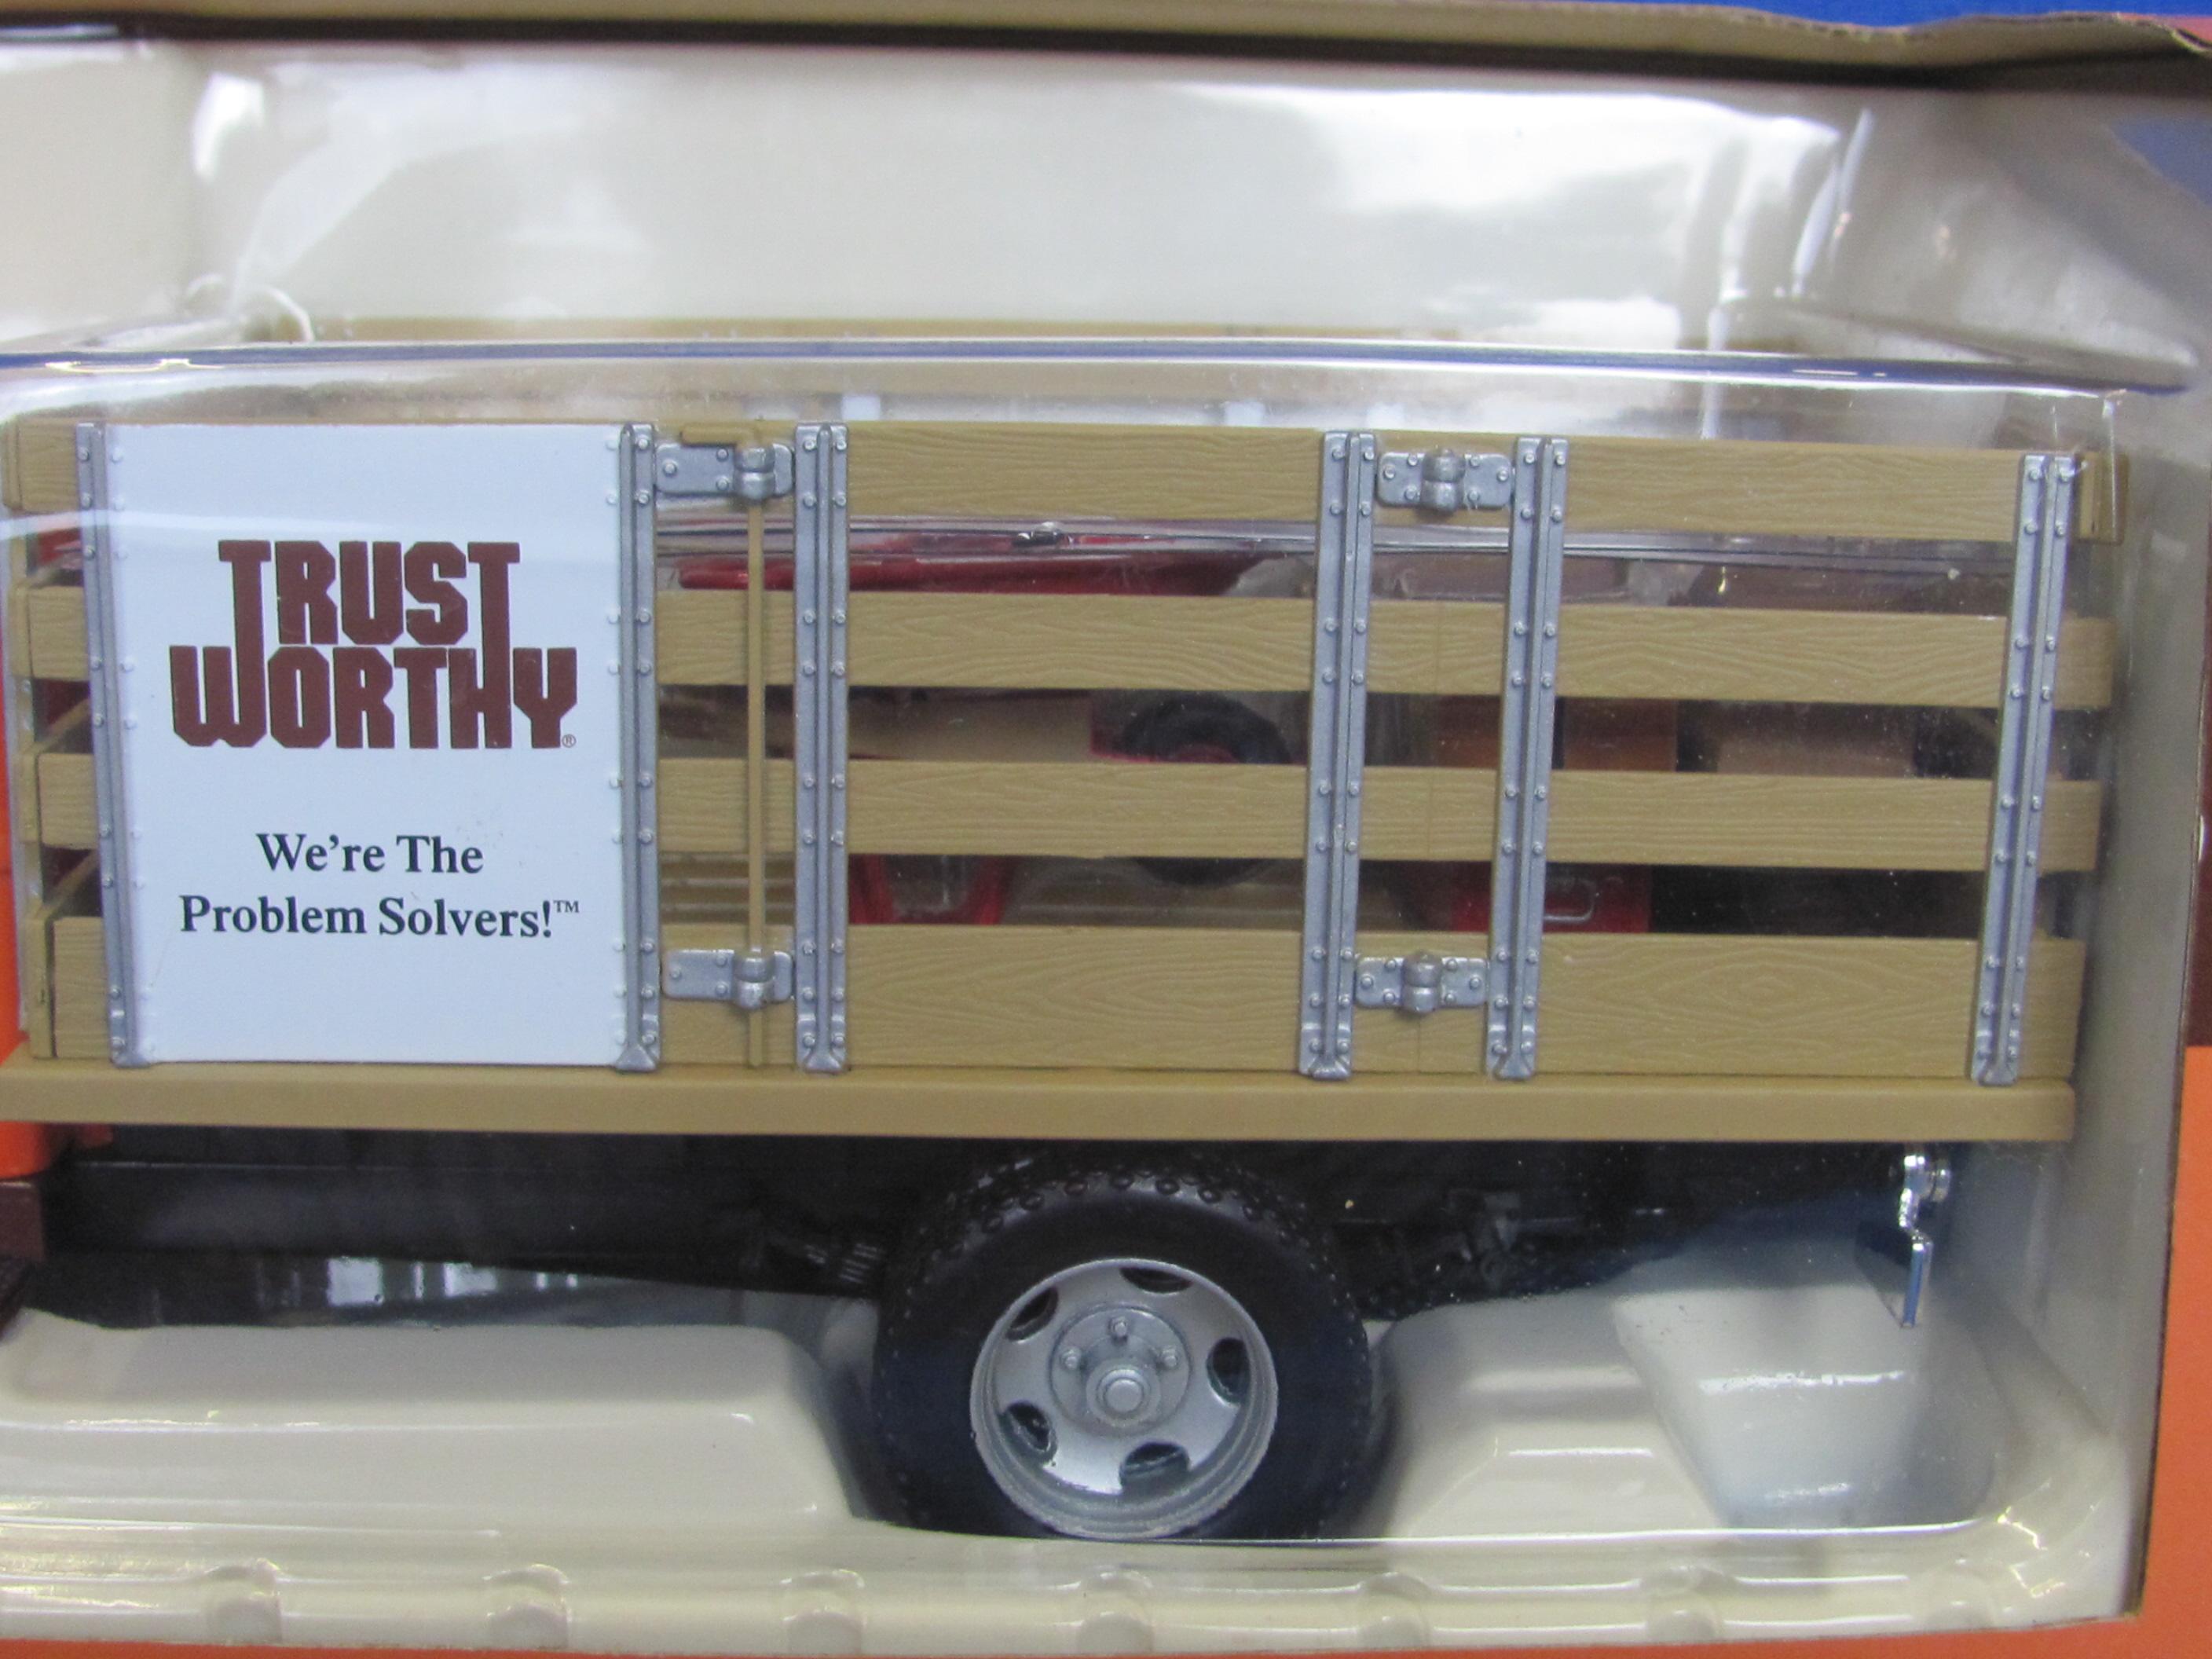 Trust Worthy 1934 Ford Stake Bed Truck – New in Box – 1:24 Scale